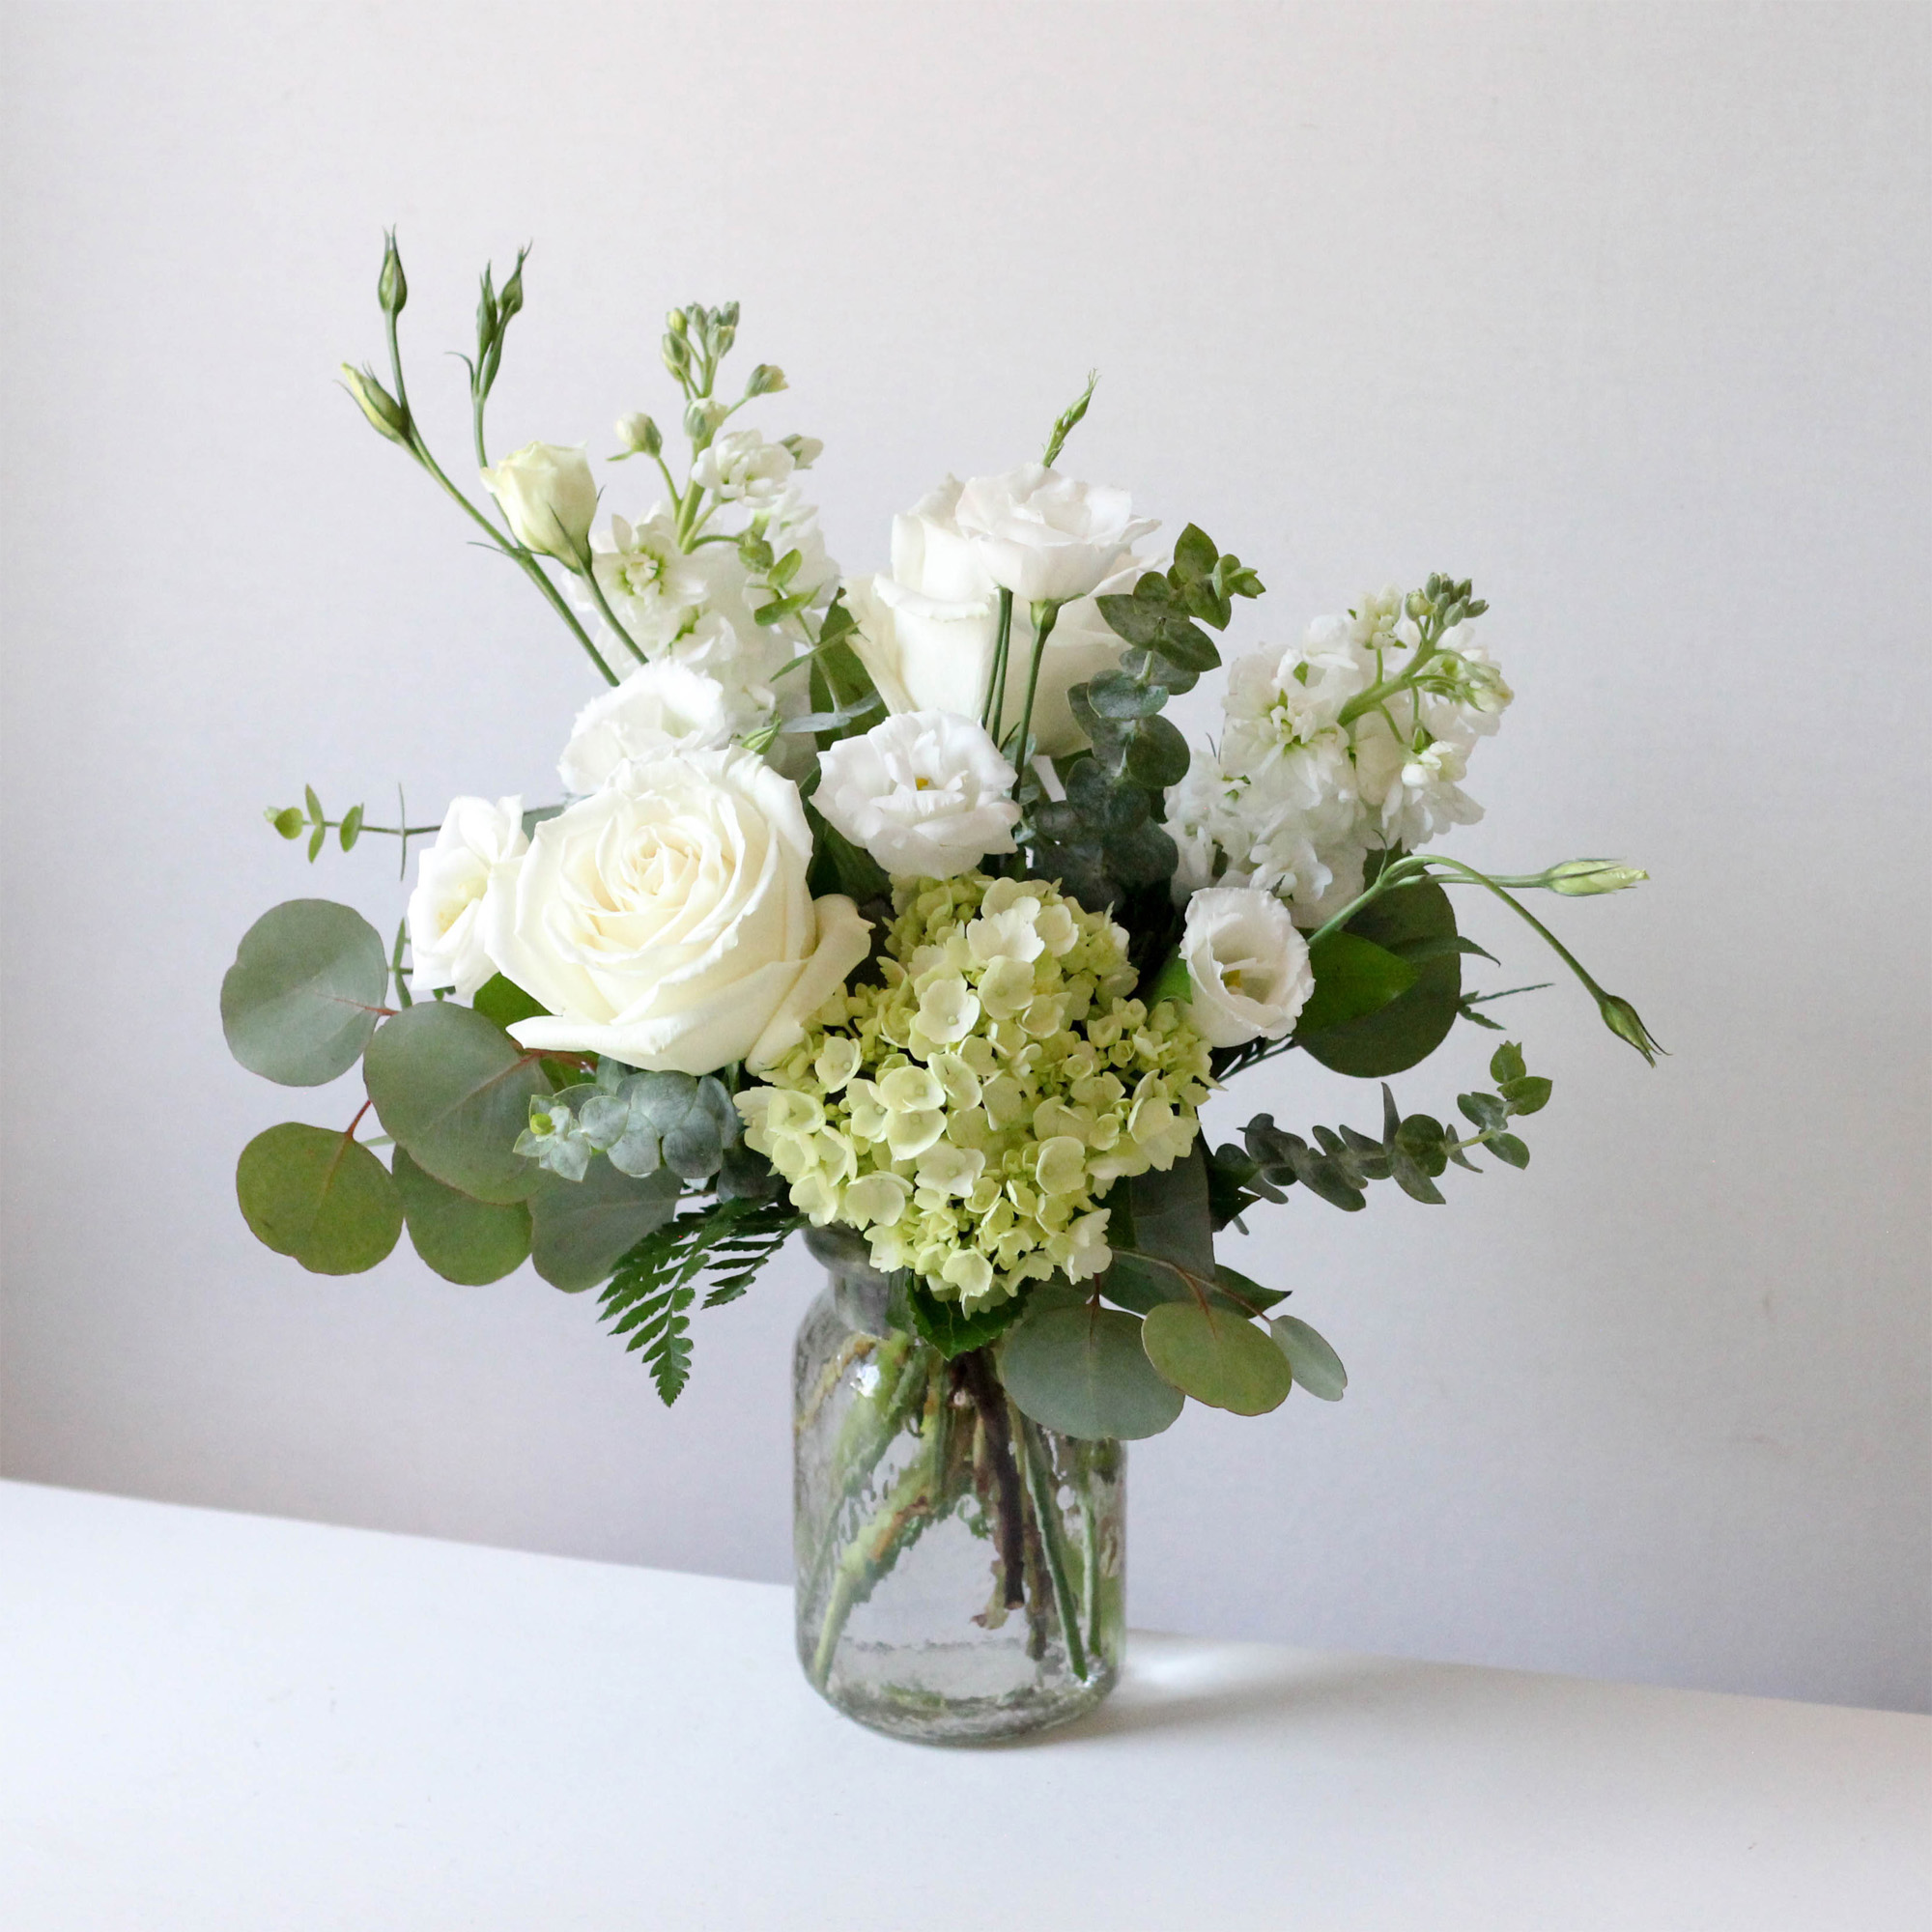 Ethereal White Floral Arrangement